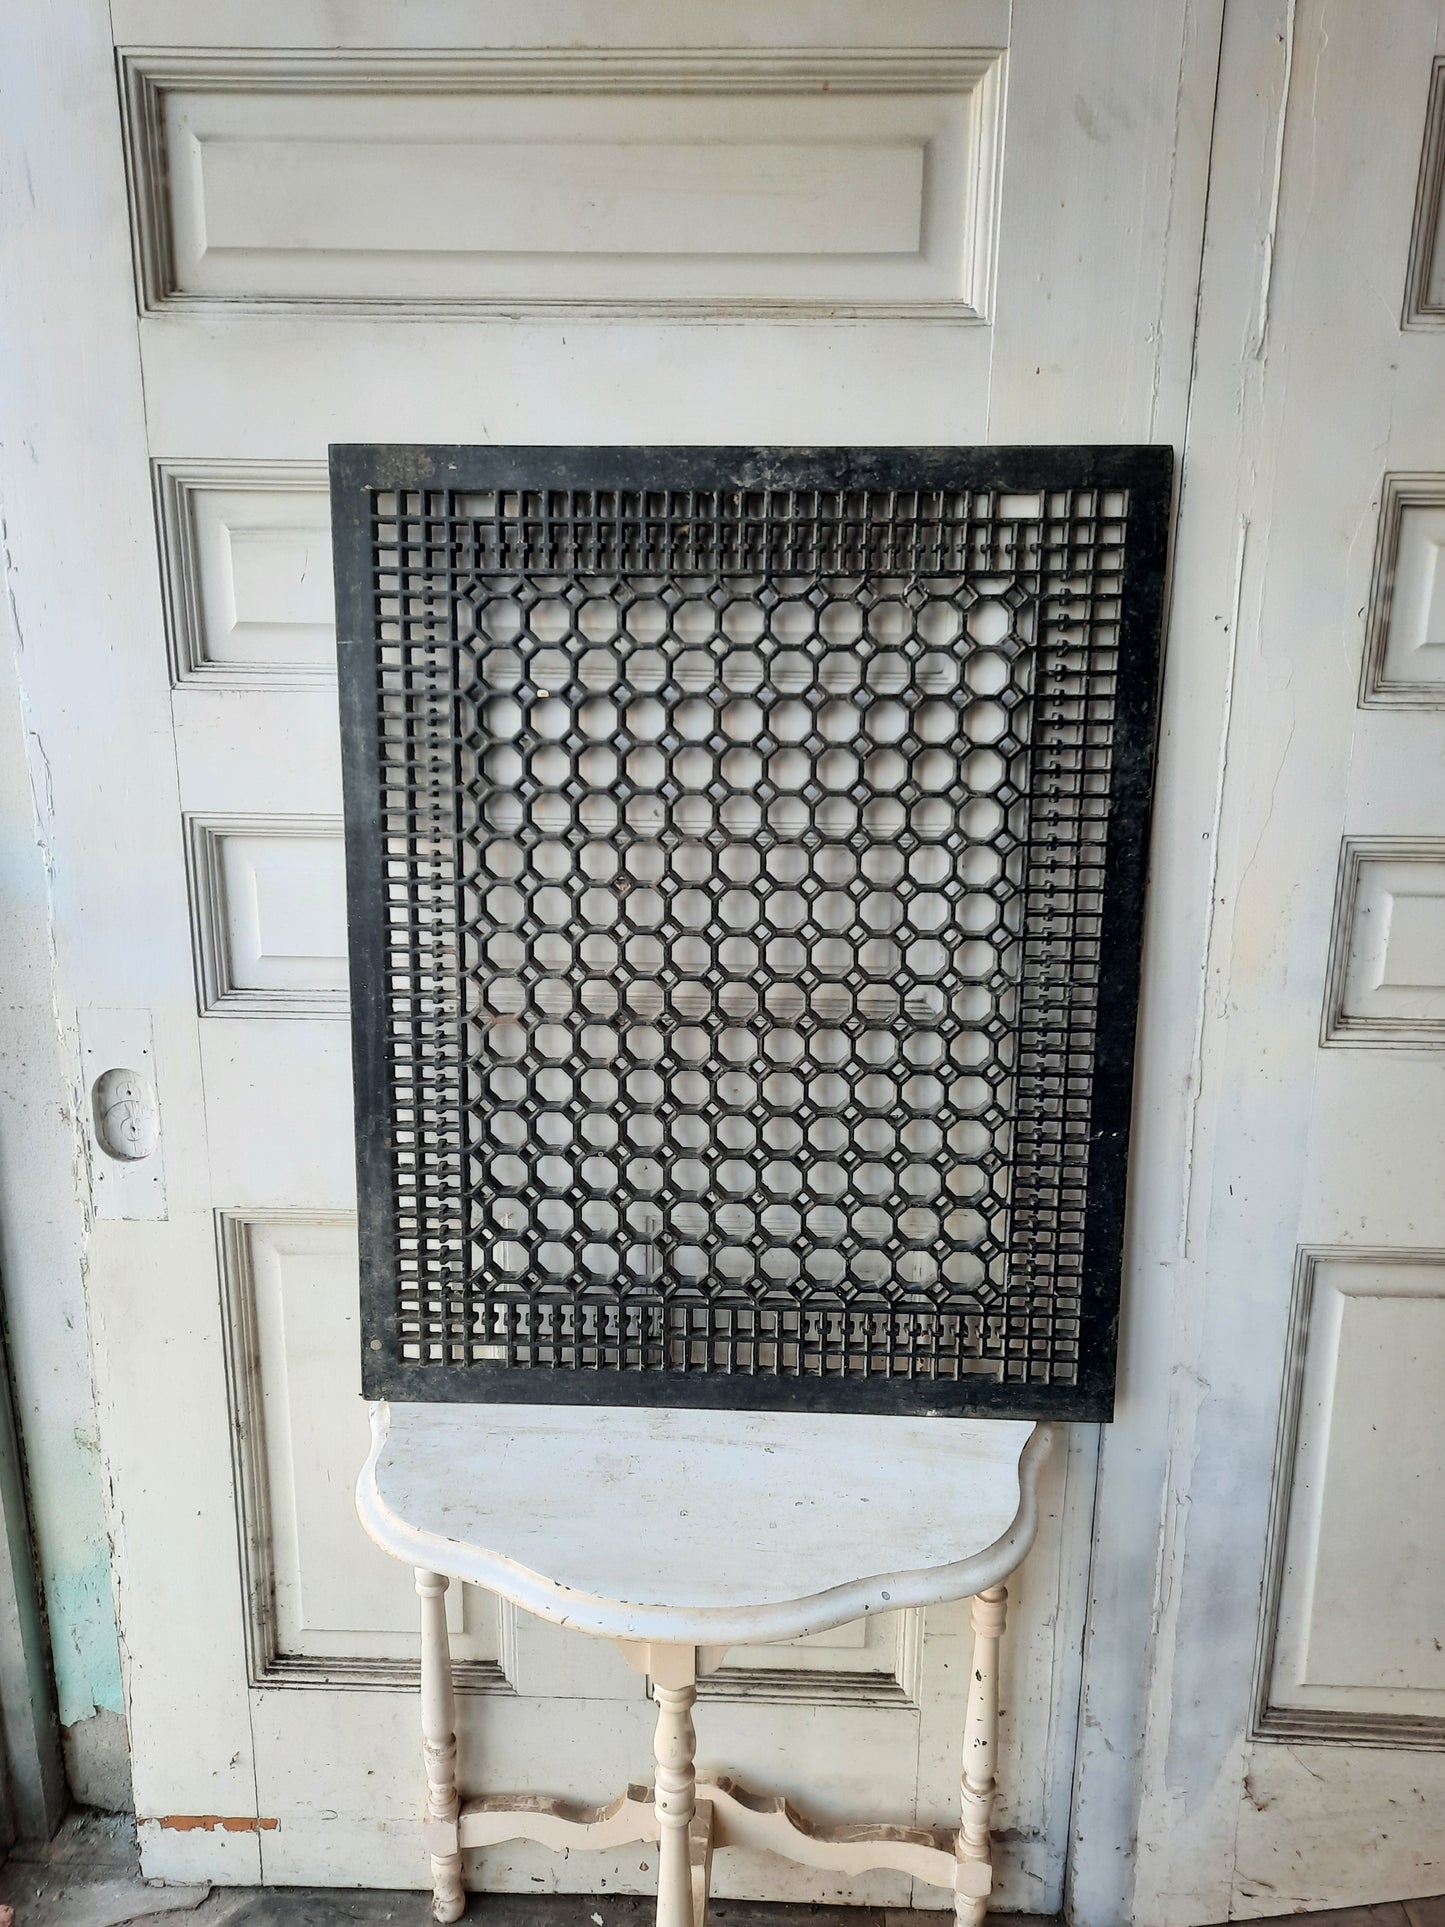 32 x 26 Extra Large Victorian Floor Grate, Large Iron Floor Vent Grate #010501